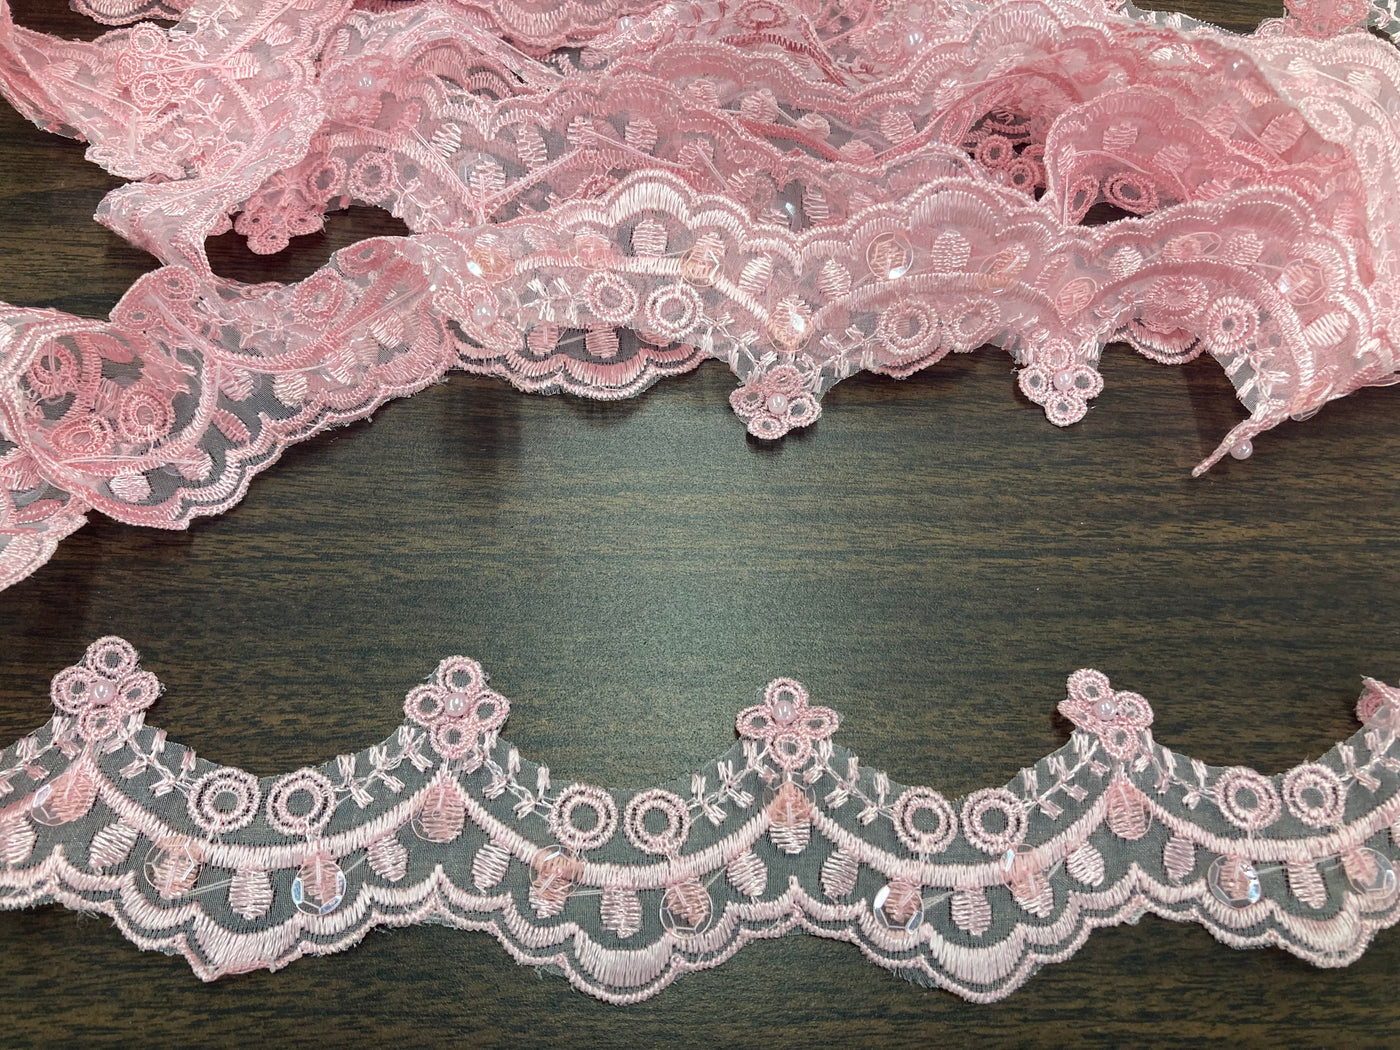 Beaded Pink Lace Trim Embroidered on 100% Polyester Organza . Large Arch Scalloped Trim. Formal Trim. Perfect for Edging and Gowns. Sold by the Yard. Lace Usa